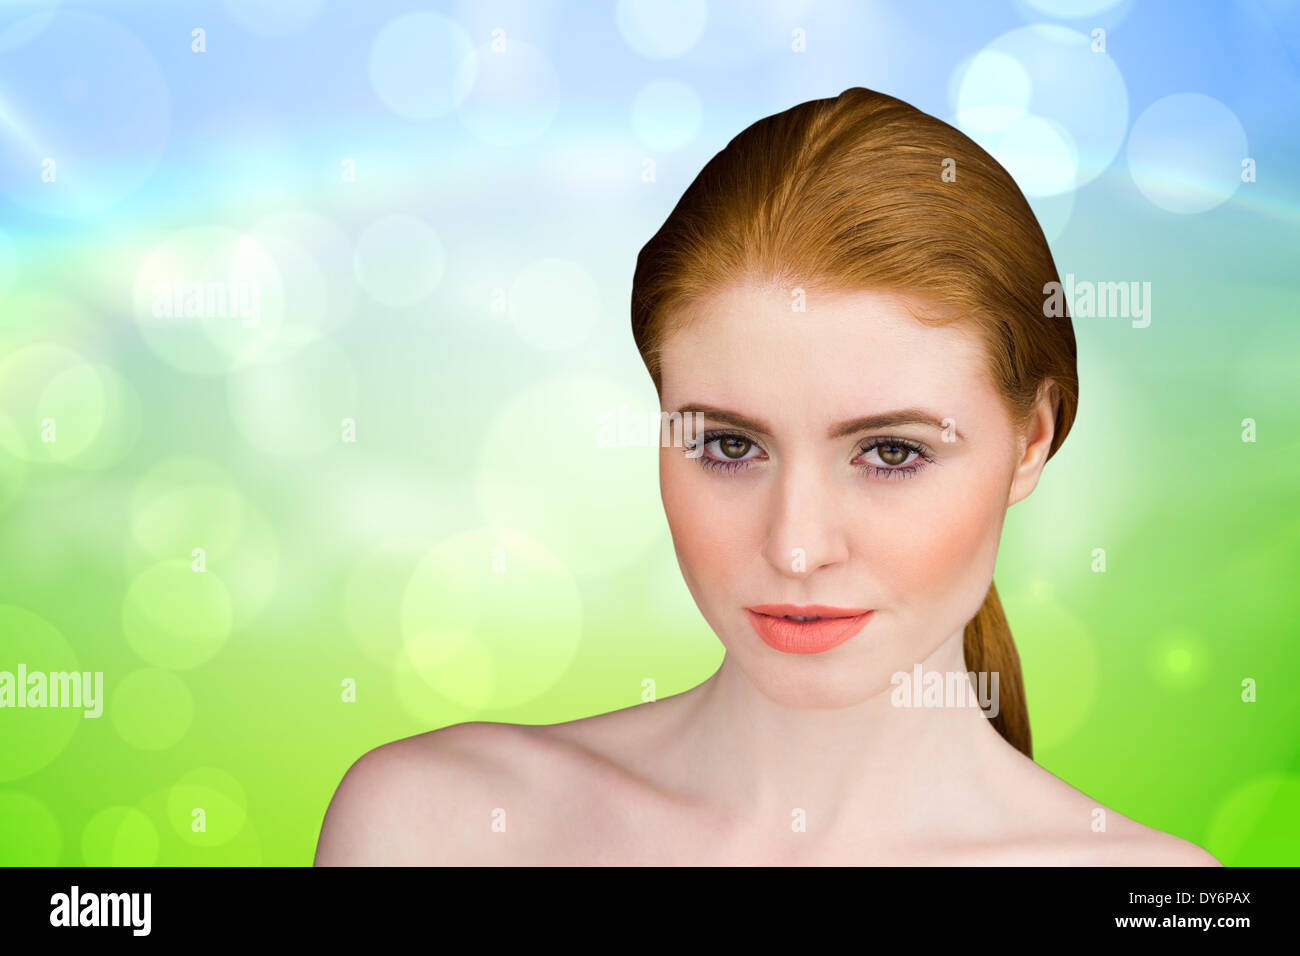 Composite image of beautiful redhead looking at camera Stock Photo